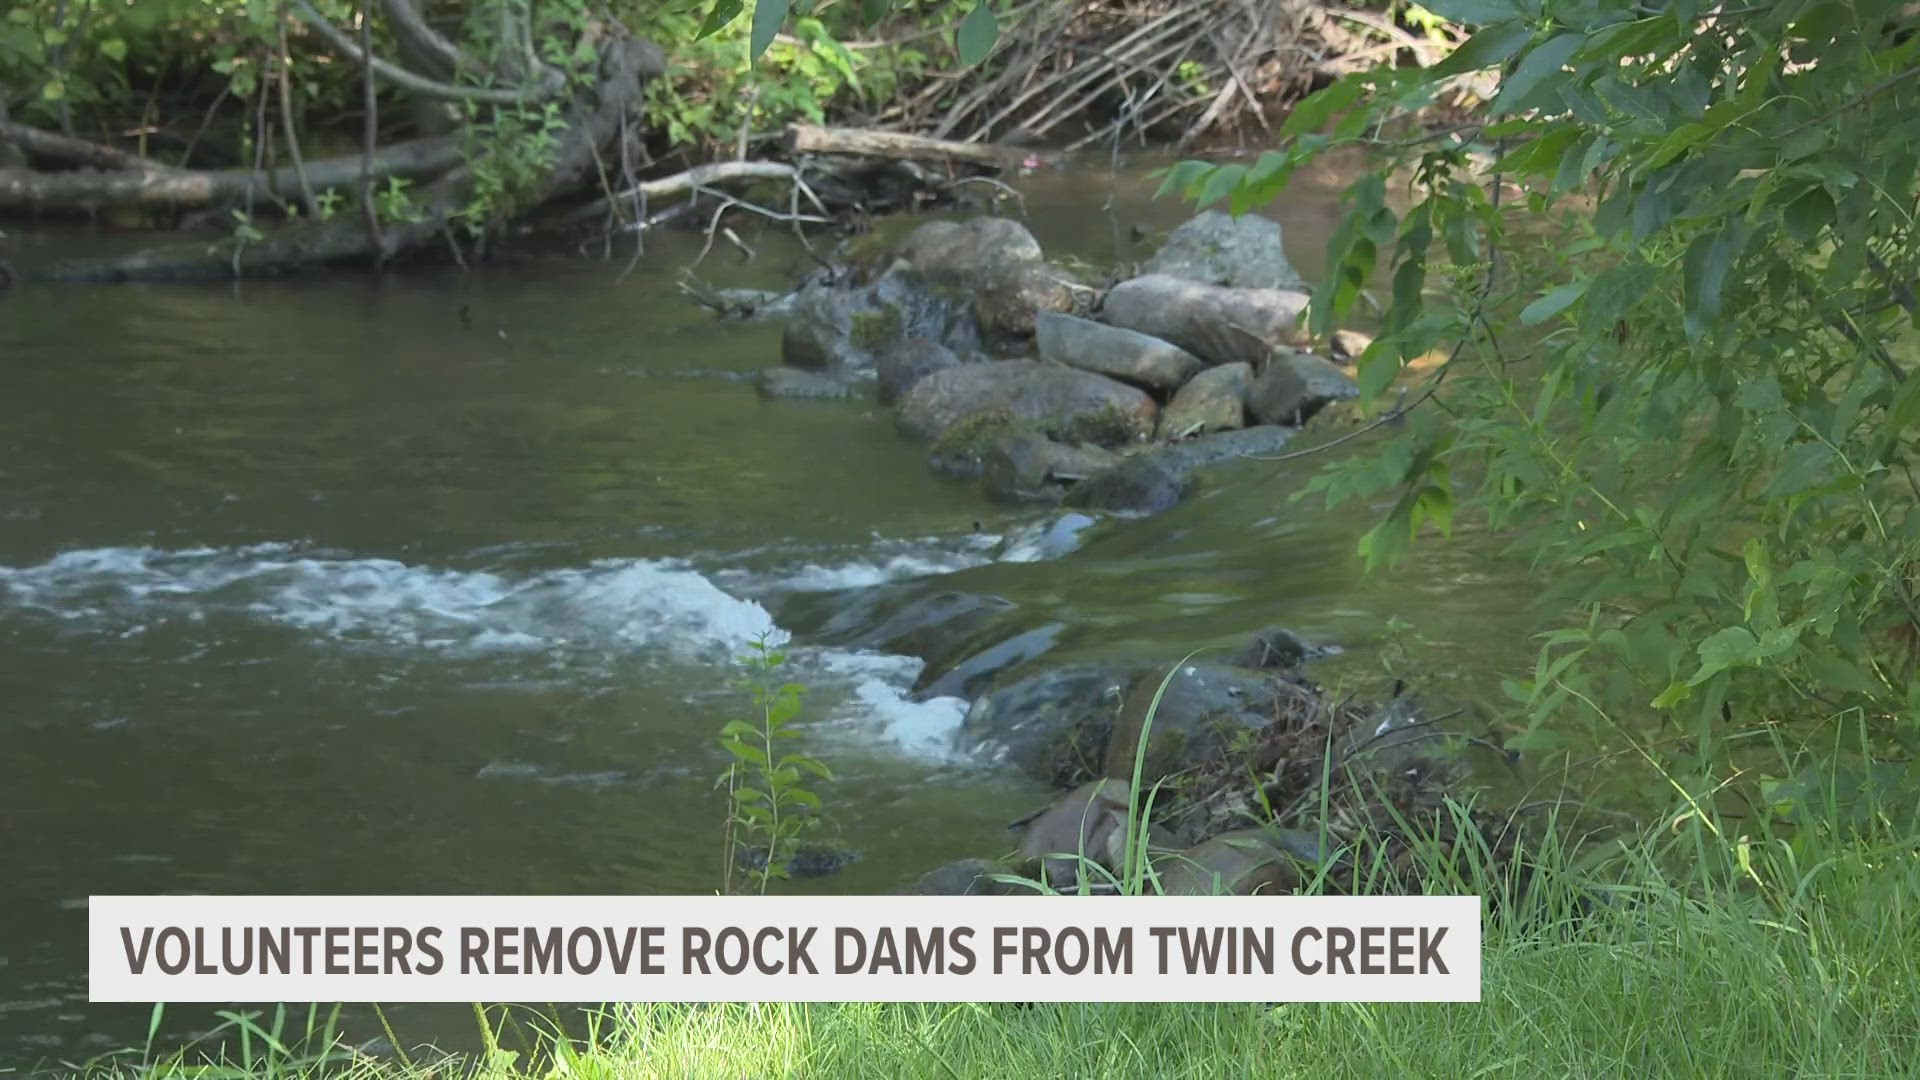 Volunteers removed rock dams from Twin Creek in Muskegon to help the ecosystem.